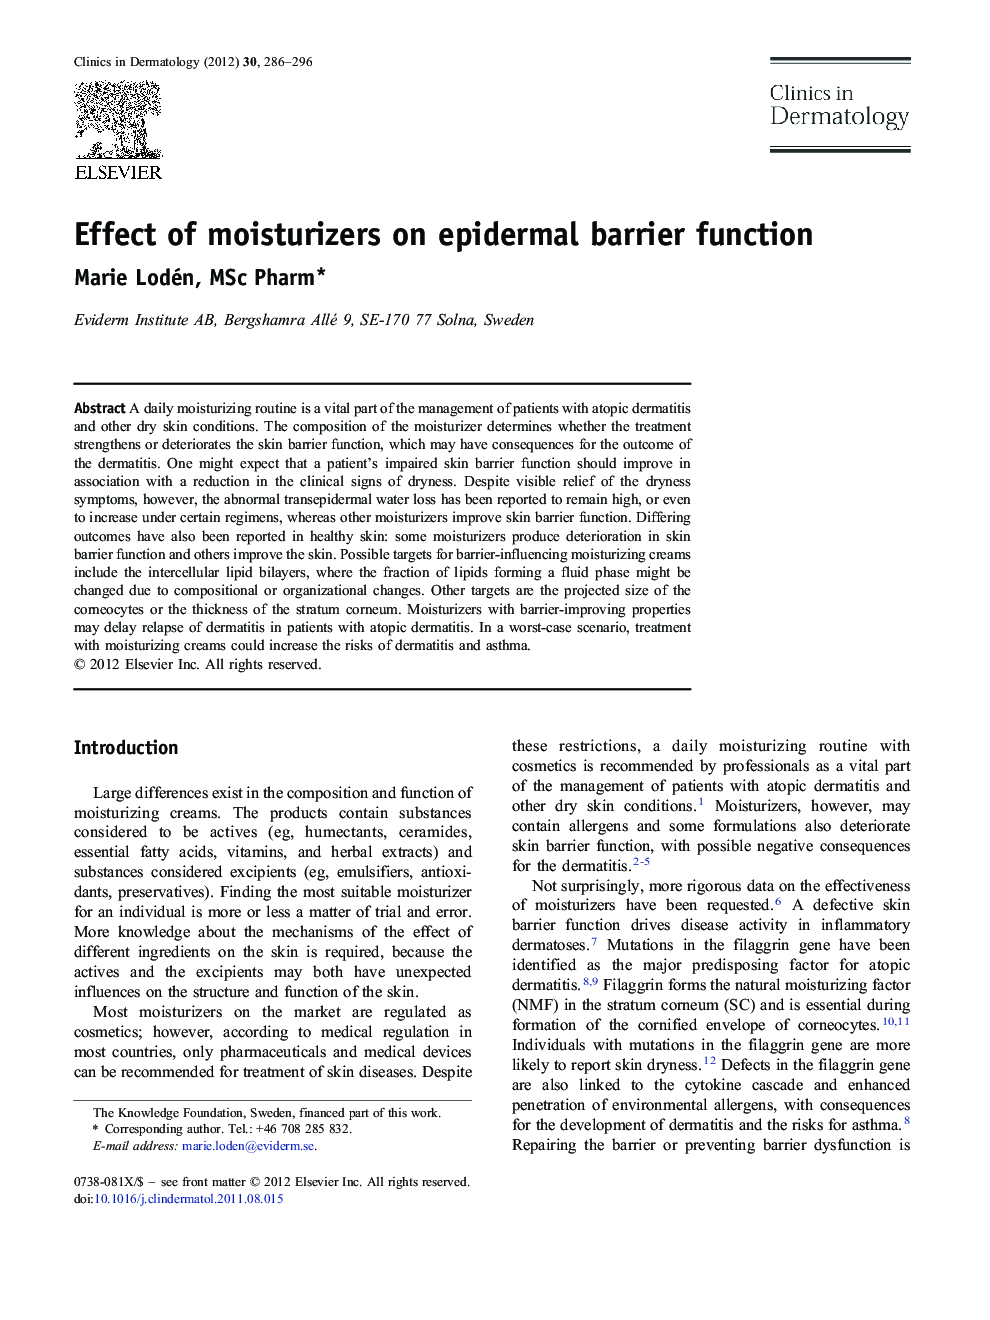 Effect of moisturizers on epidermal barrier function 